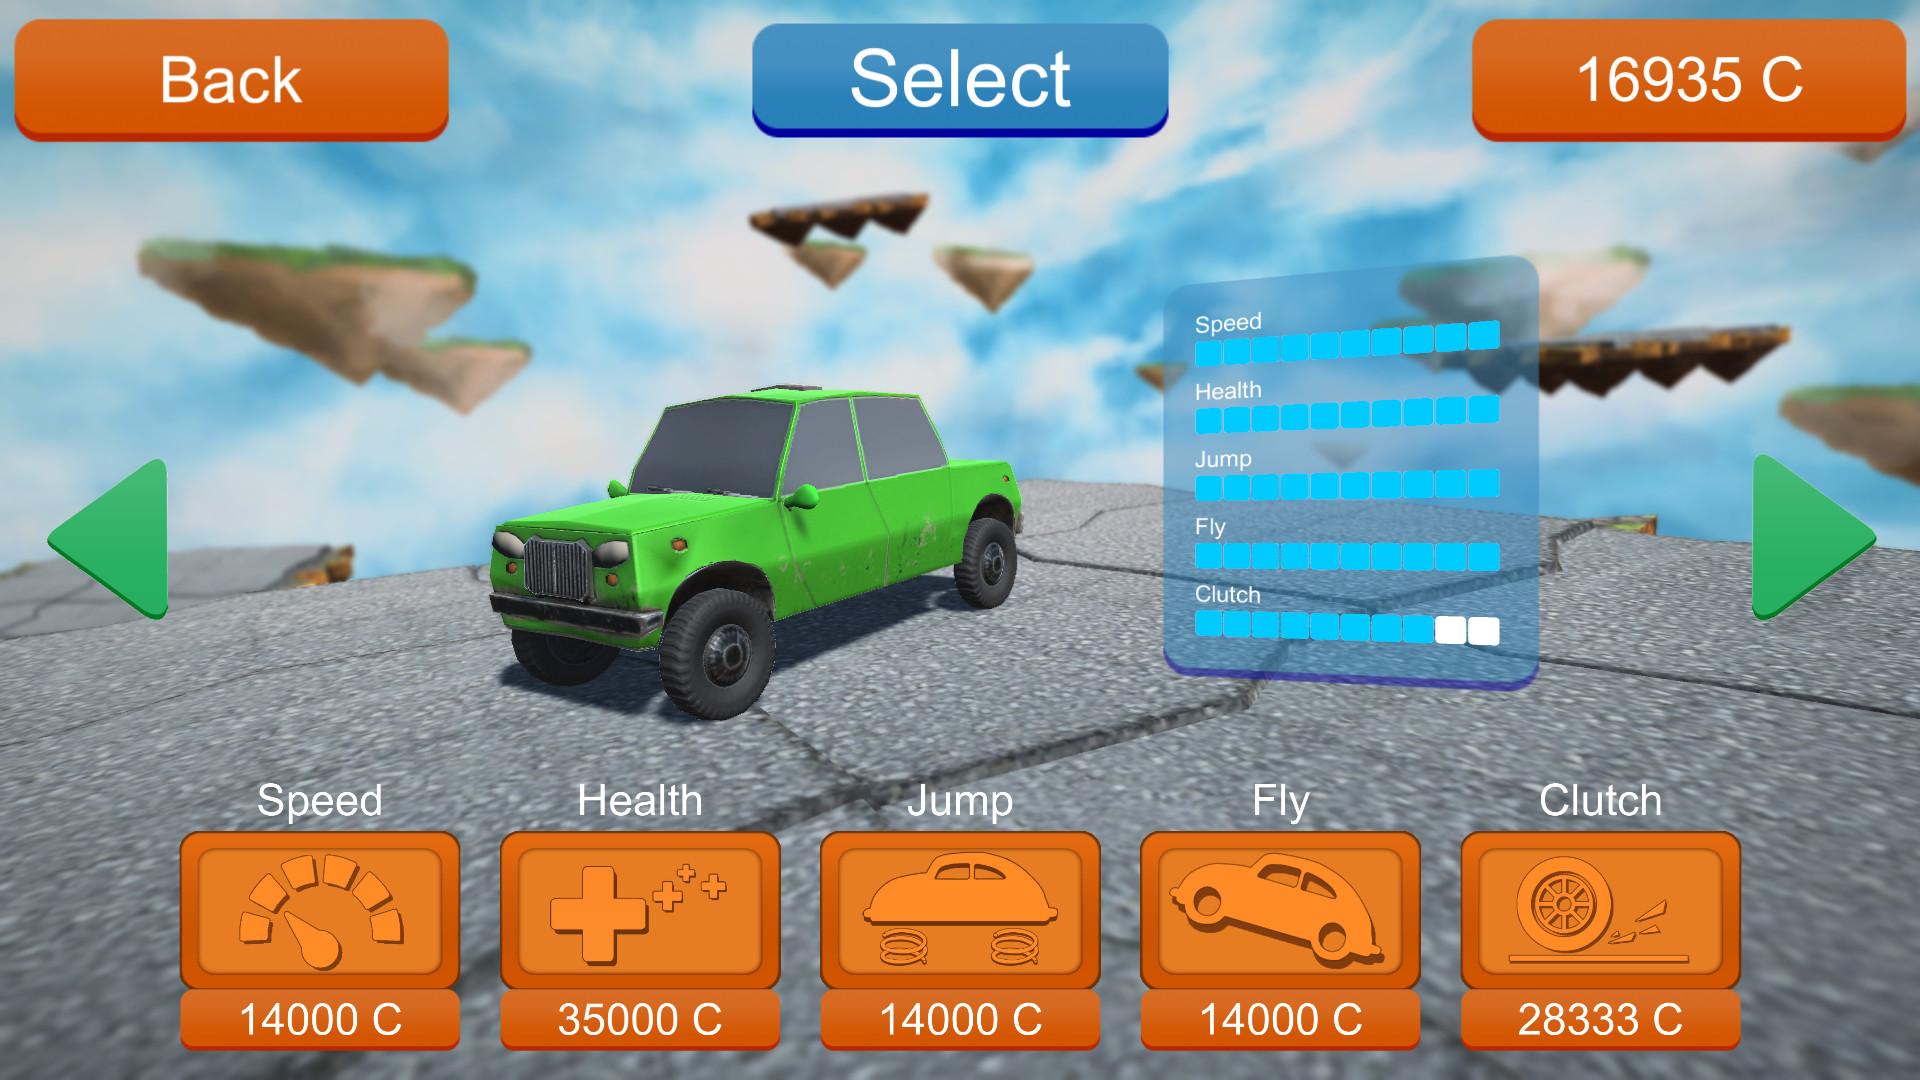 Screenshot №1 from game CrazyCars3D